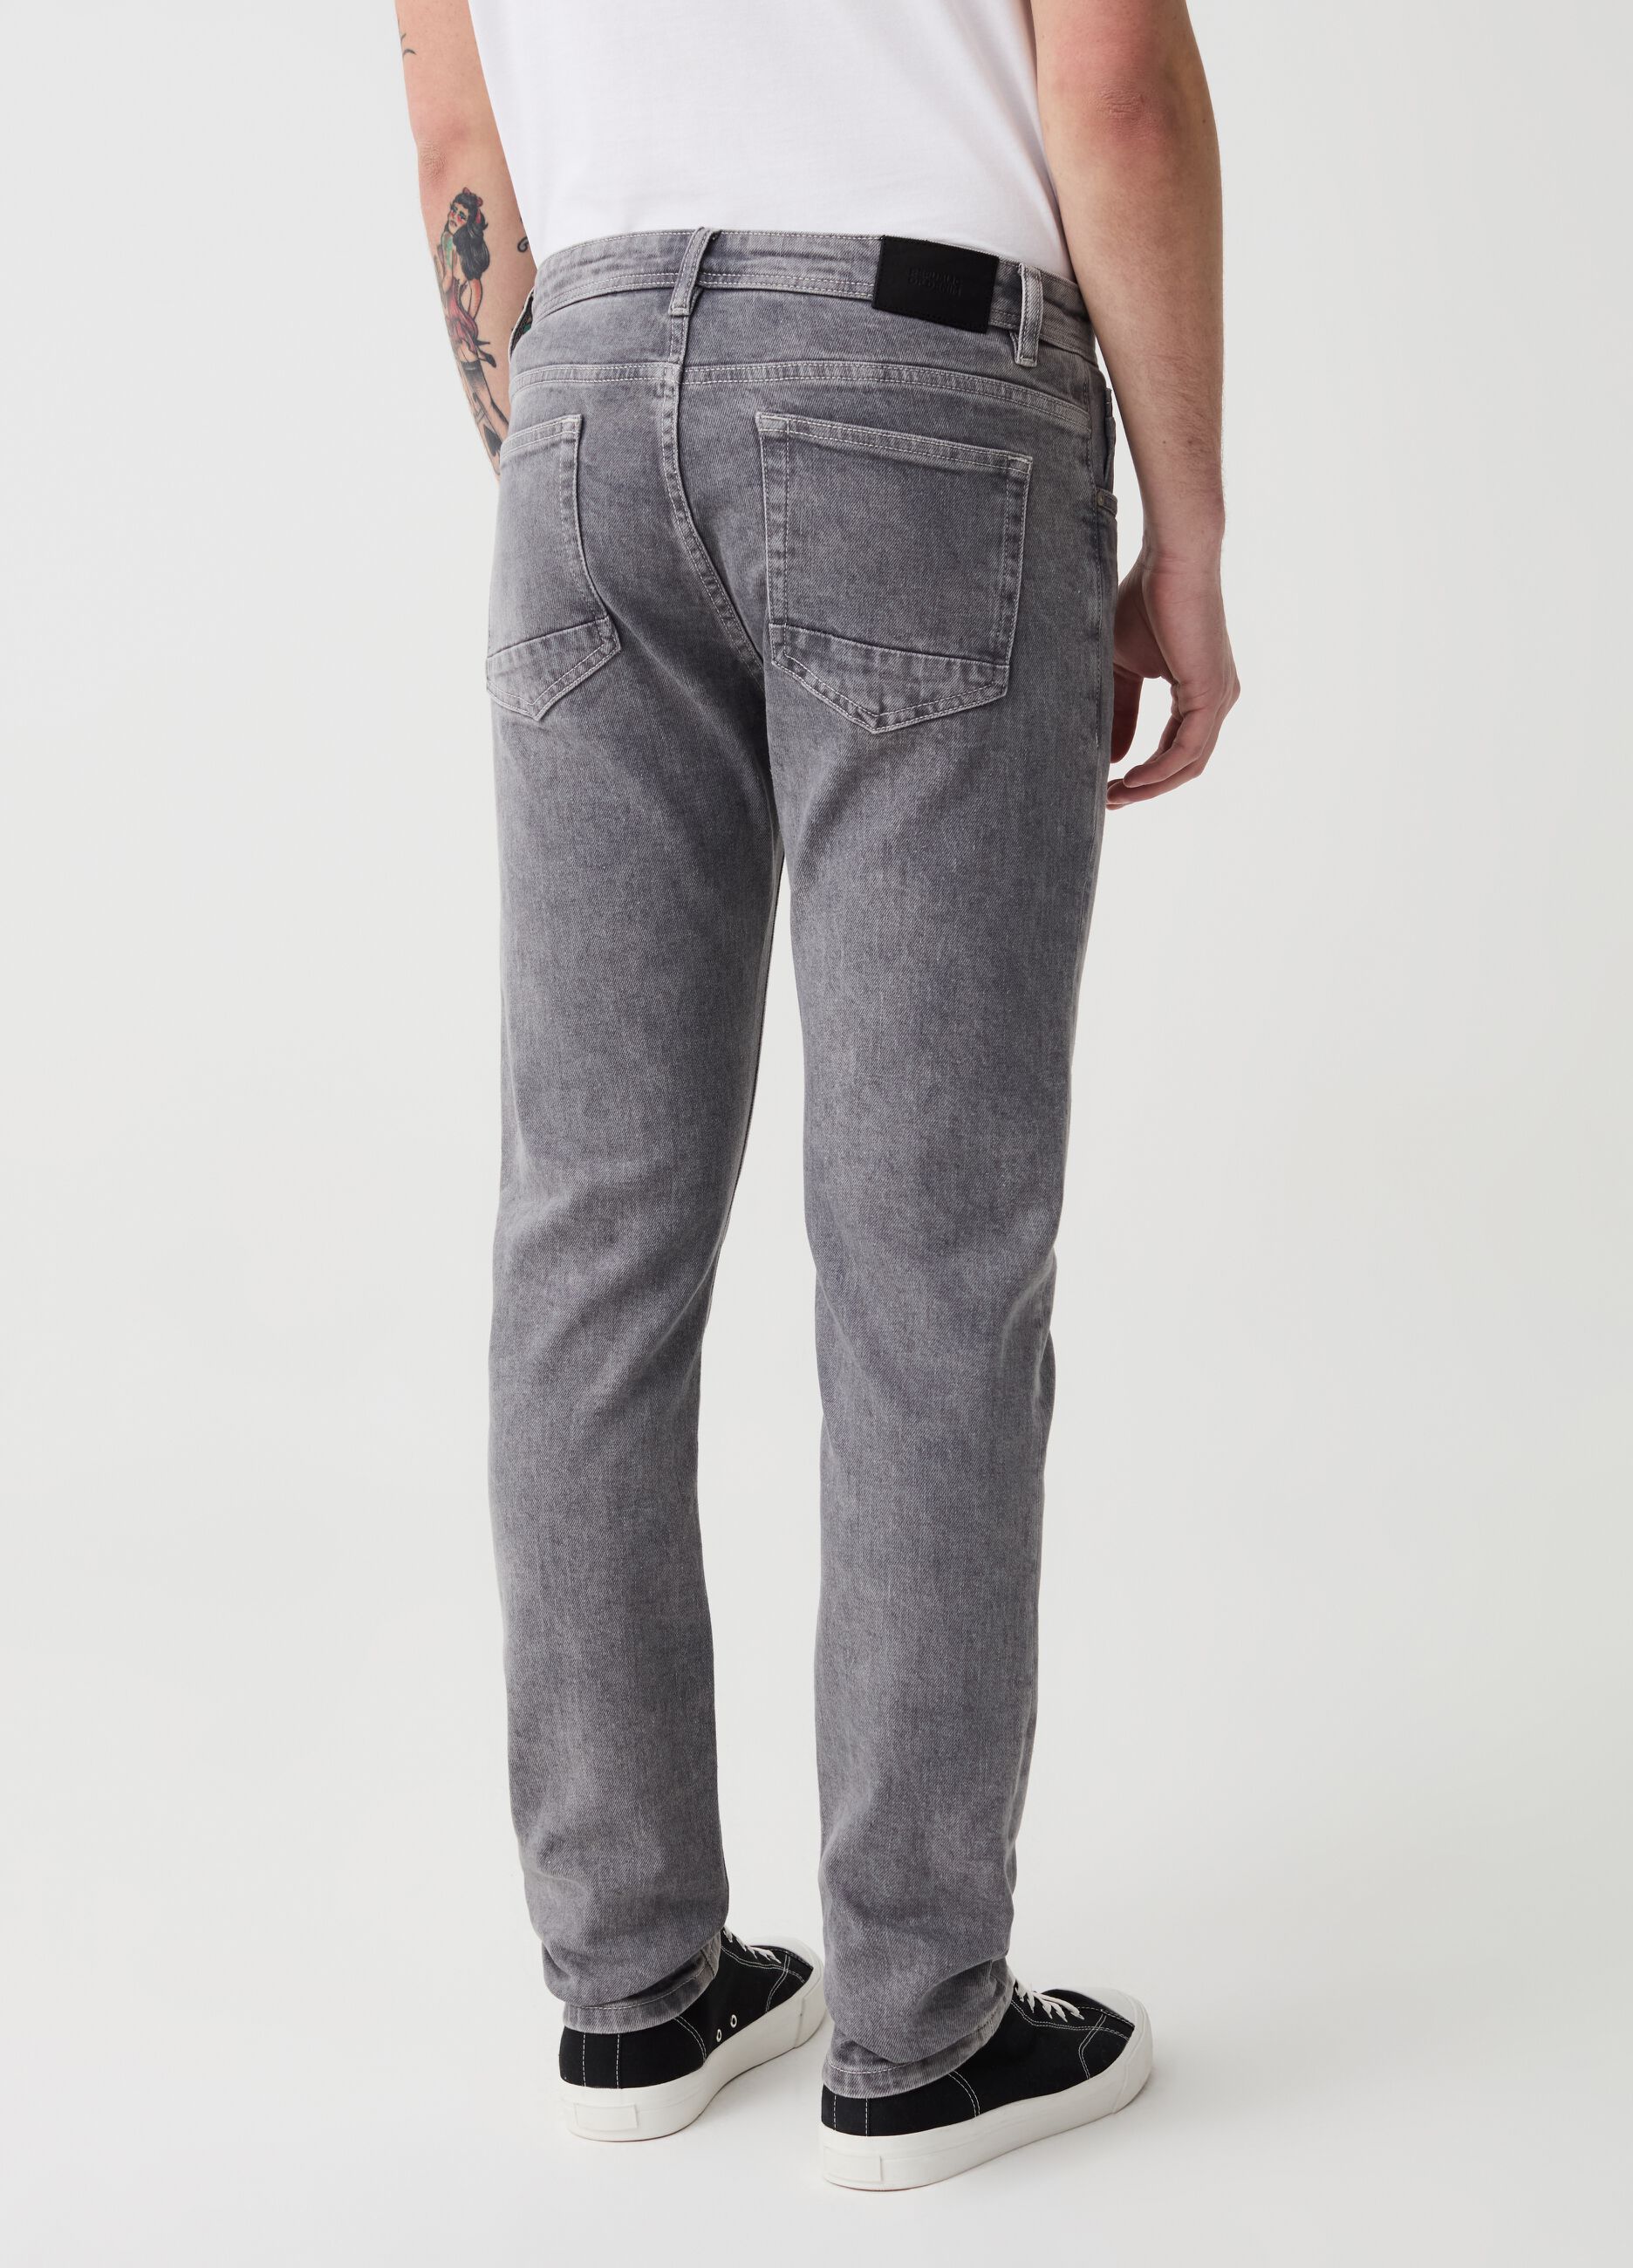 Jeans skinny fit acid wash con scoloriture